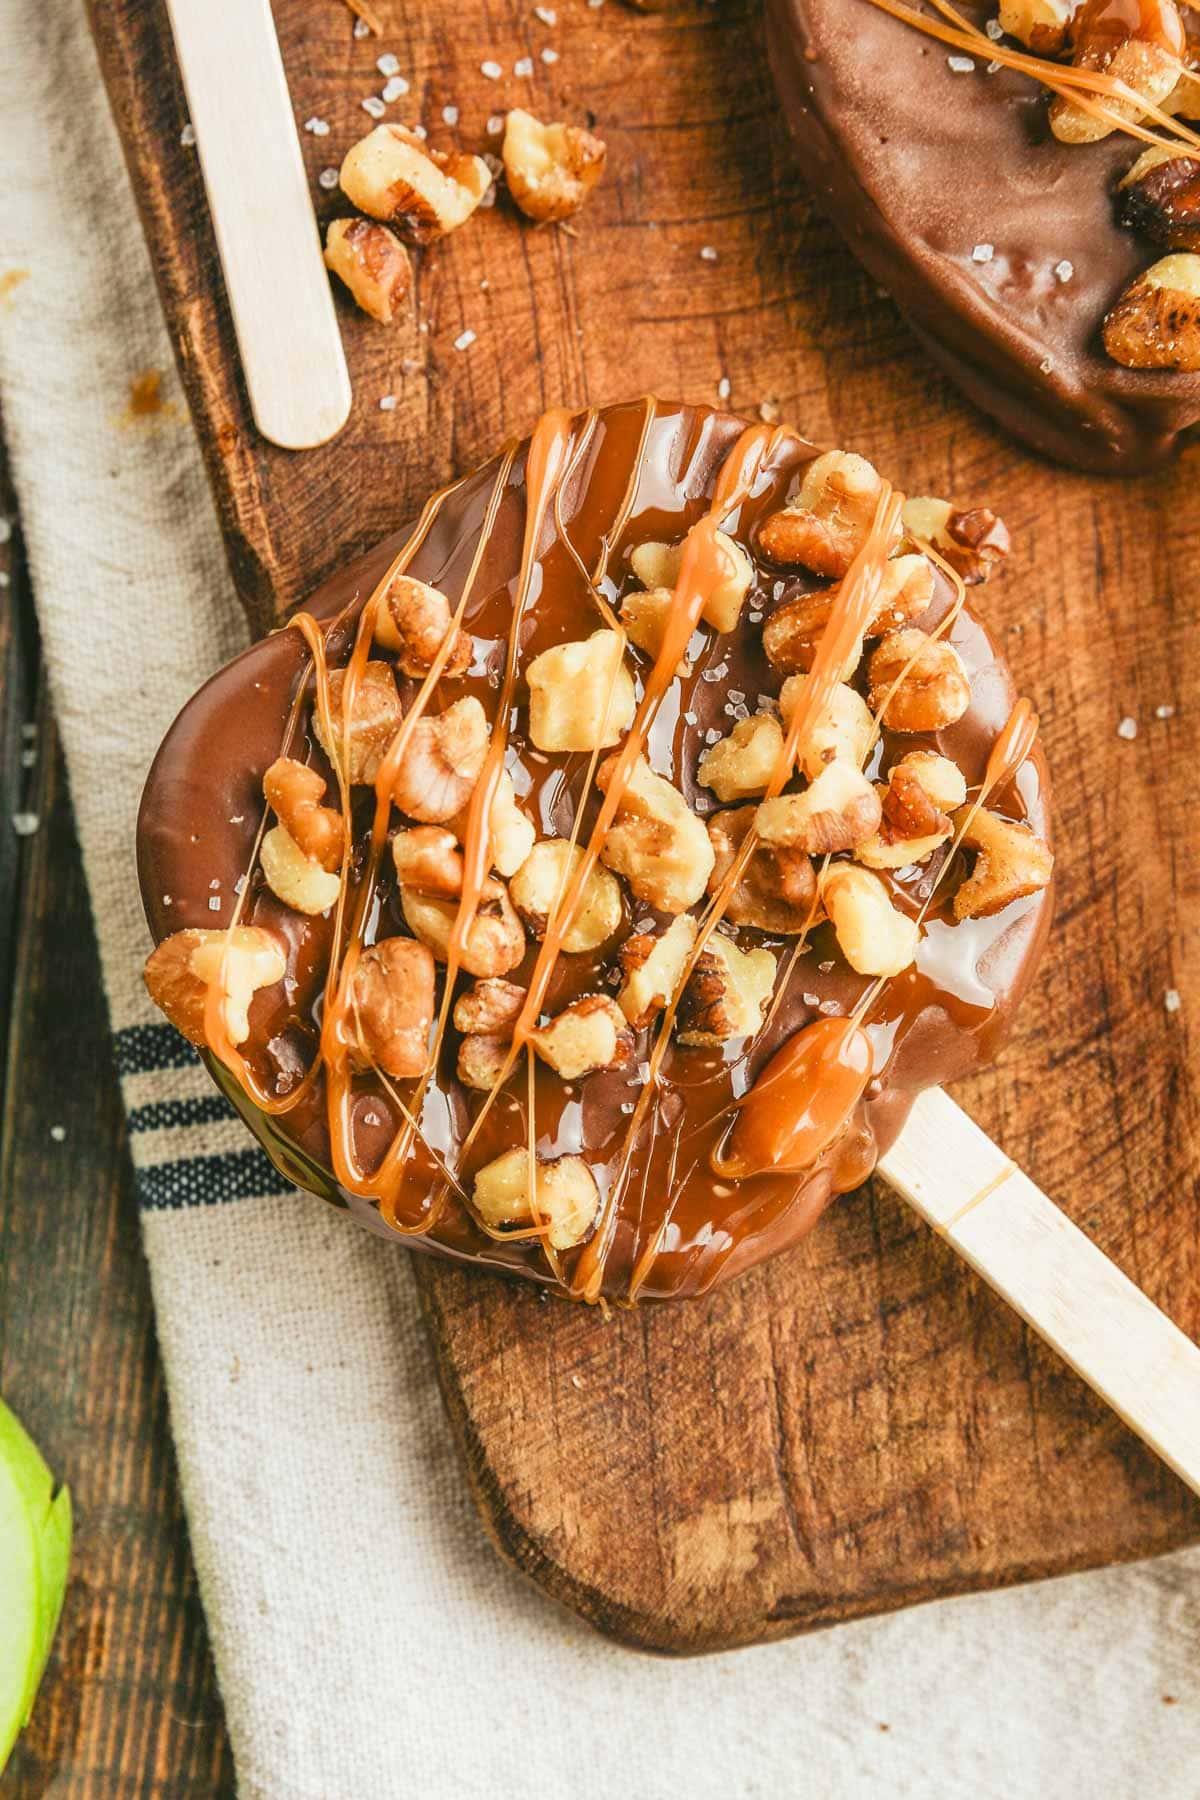 a close up of the chocolate caramel apple slices on a cutting board